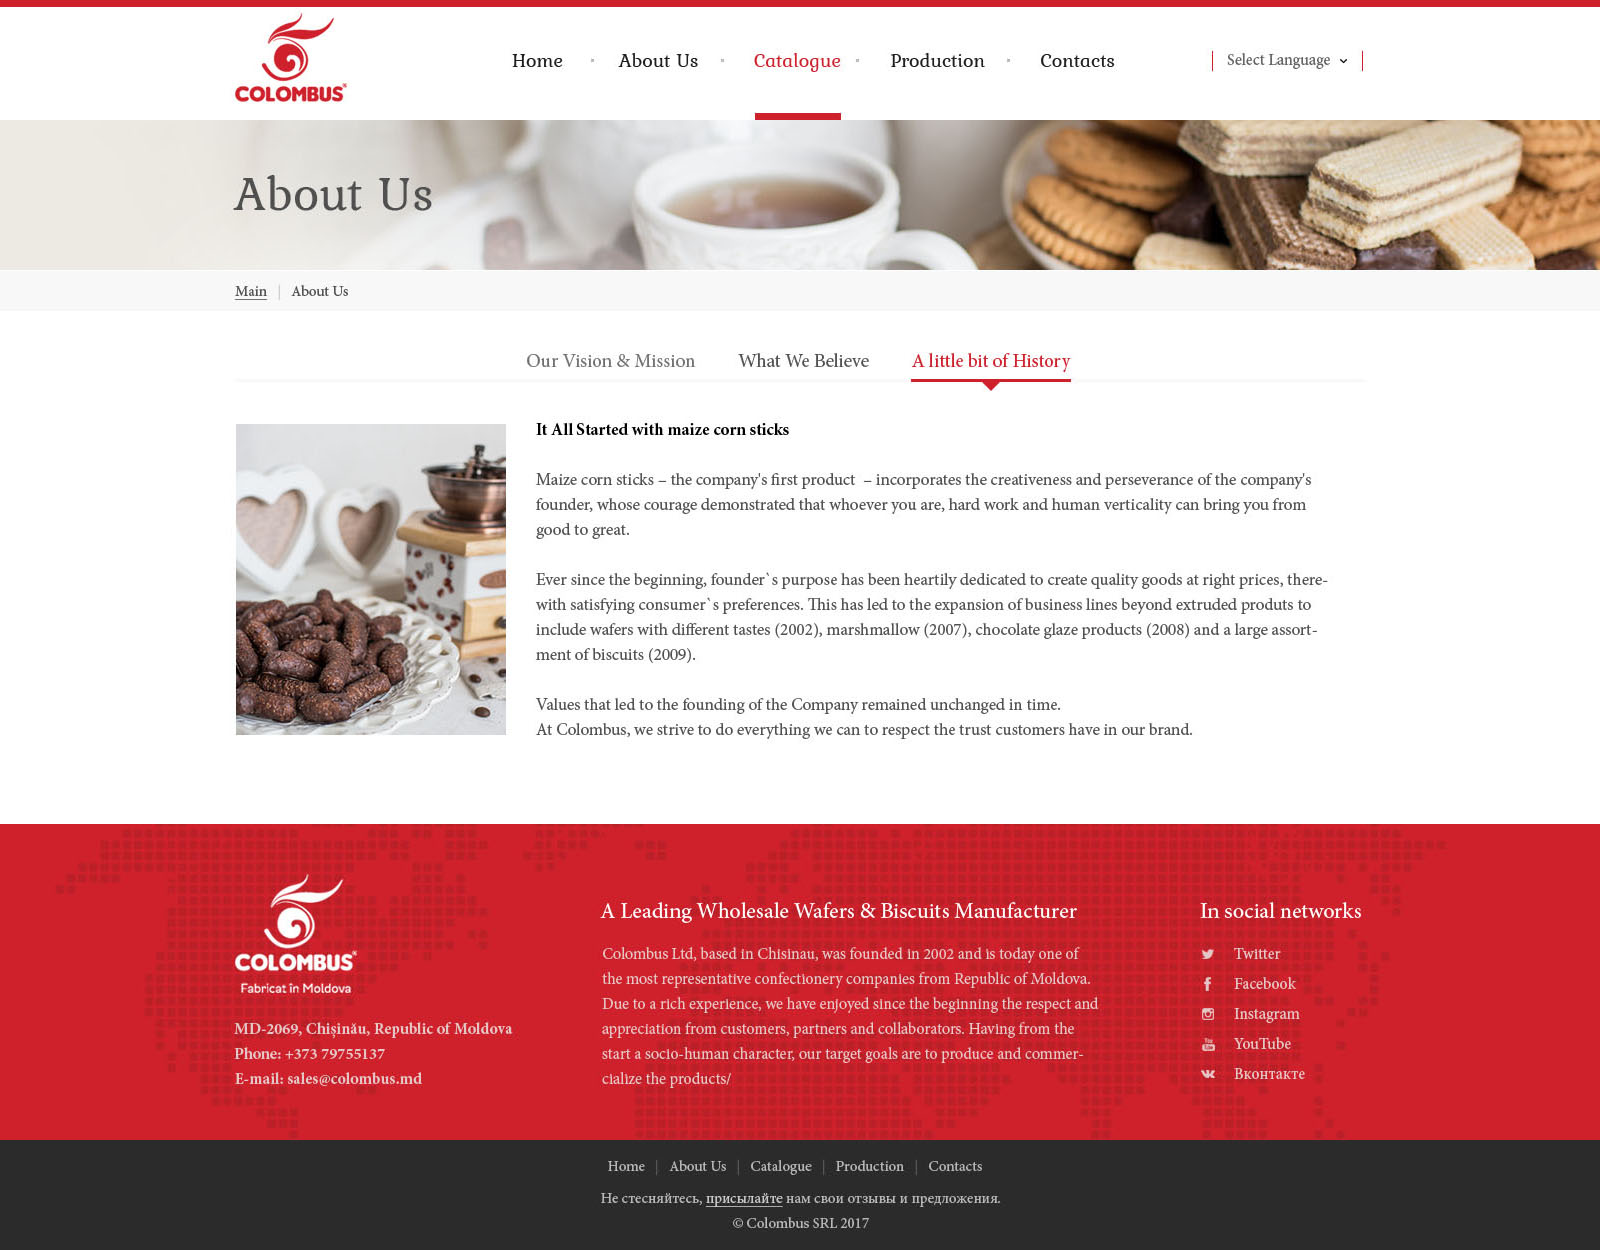 Website-catalogue for Colombus company